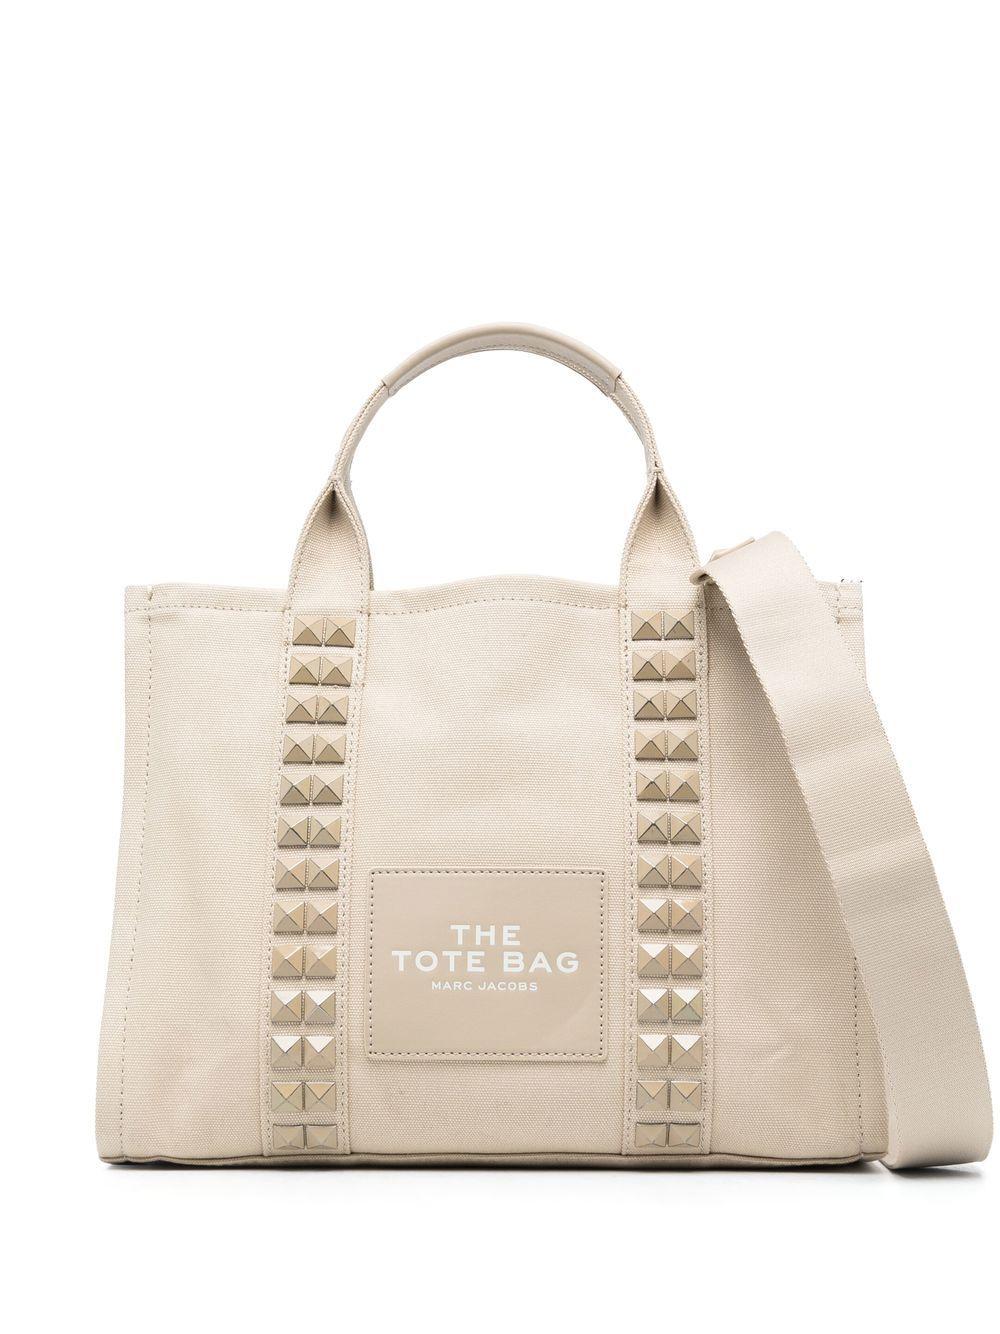 Marc Jacobs The Studded Traveler Tote Bag in Natural | Lyst